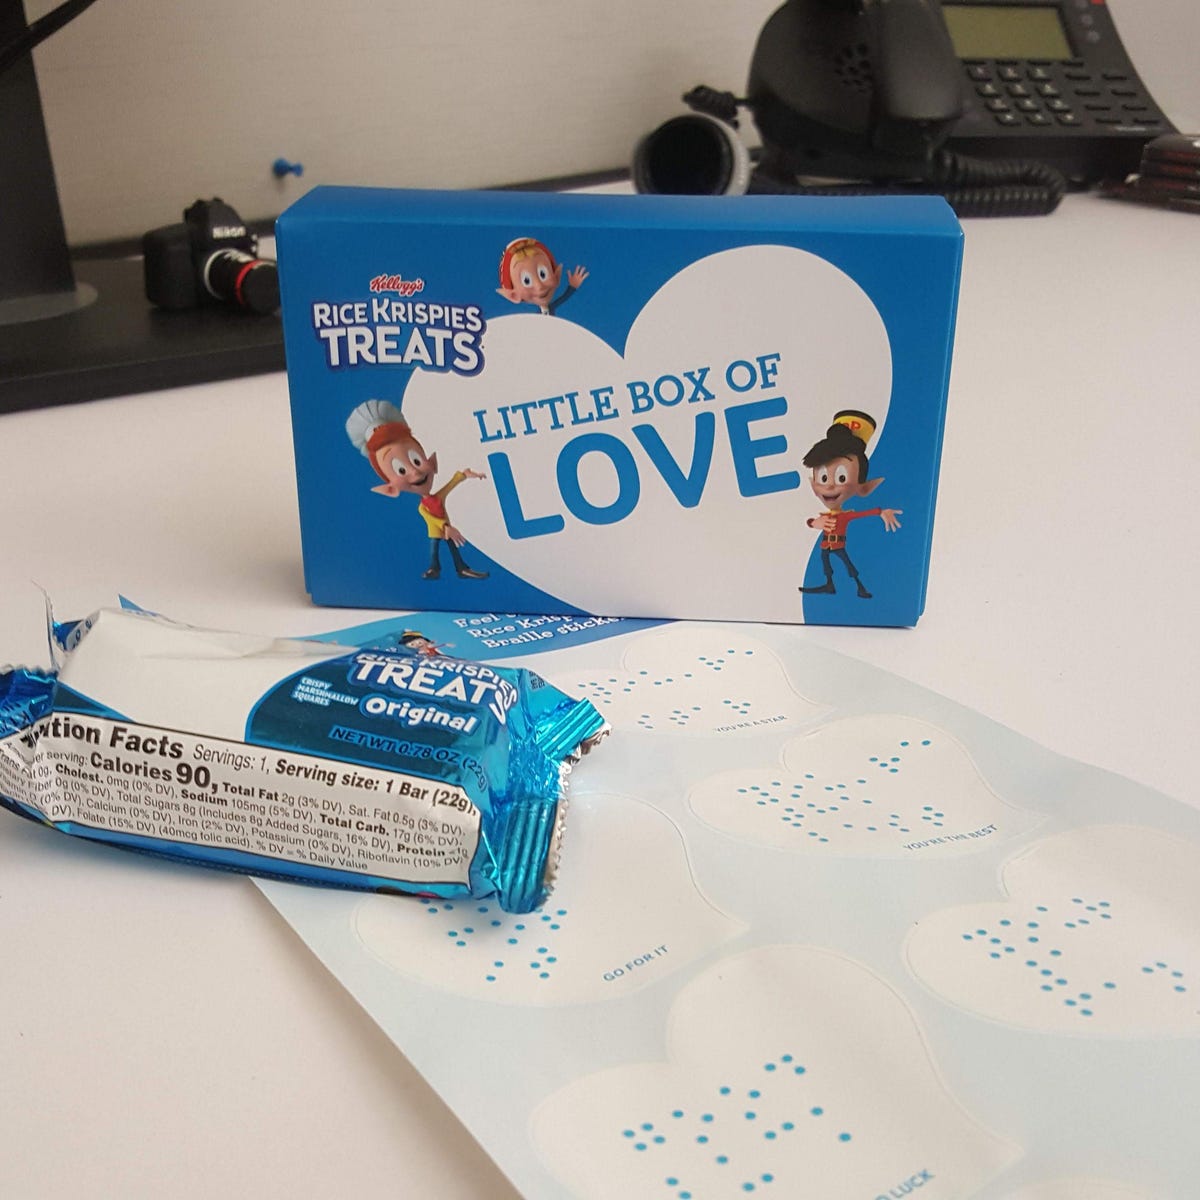 Rice Krispies Treats is making free braille stickers, audio boxes - CNET